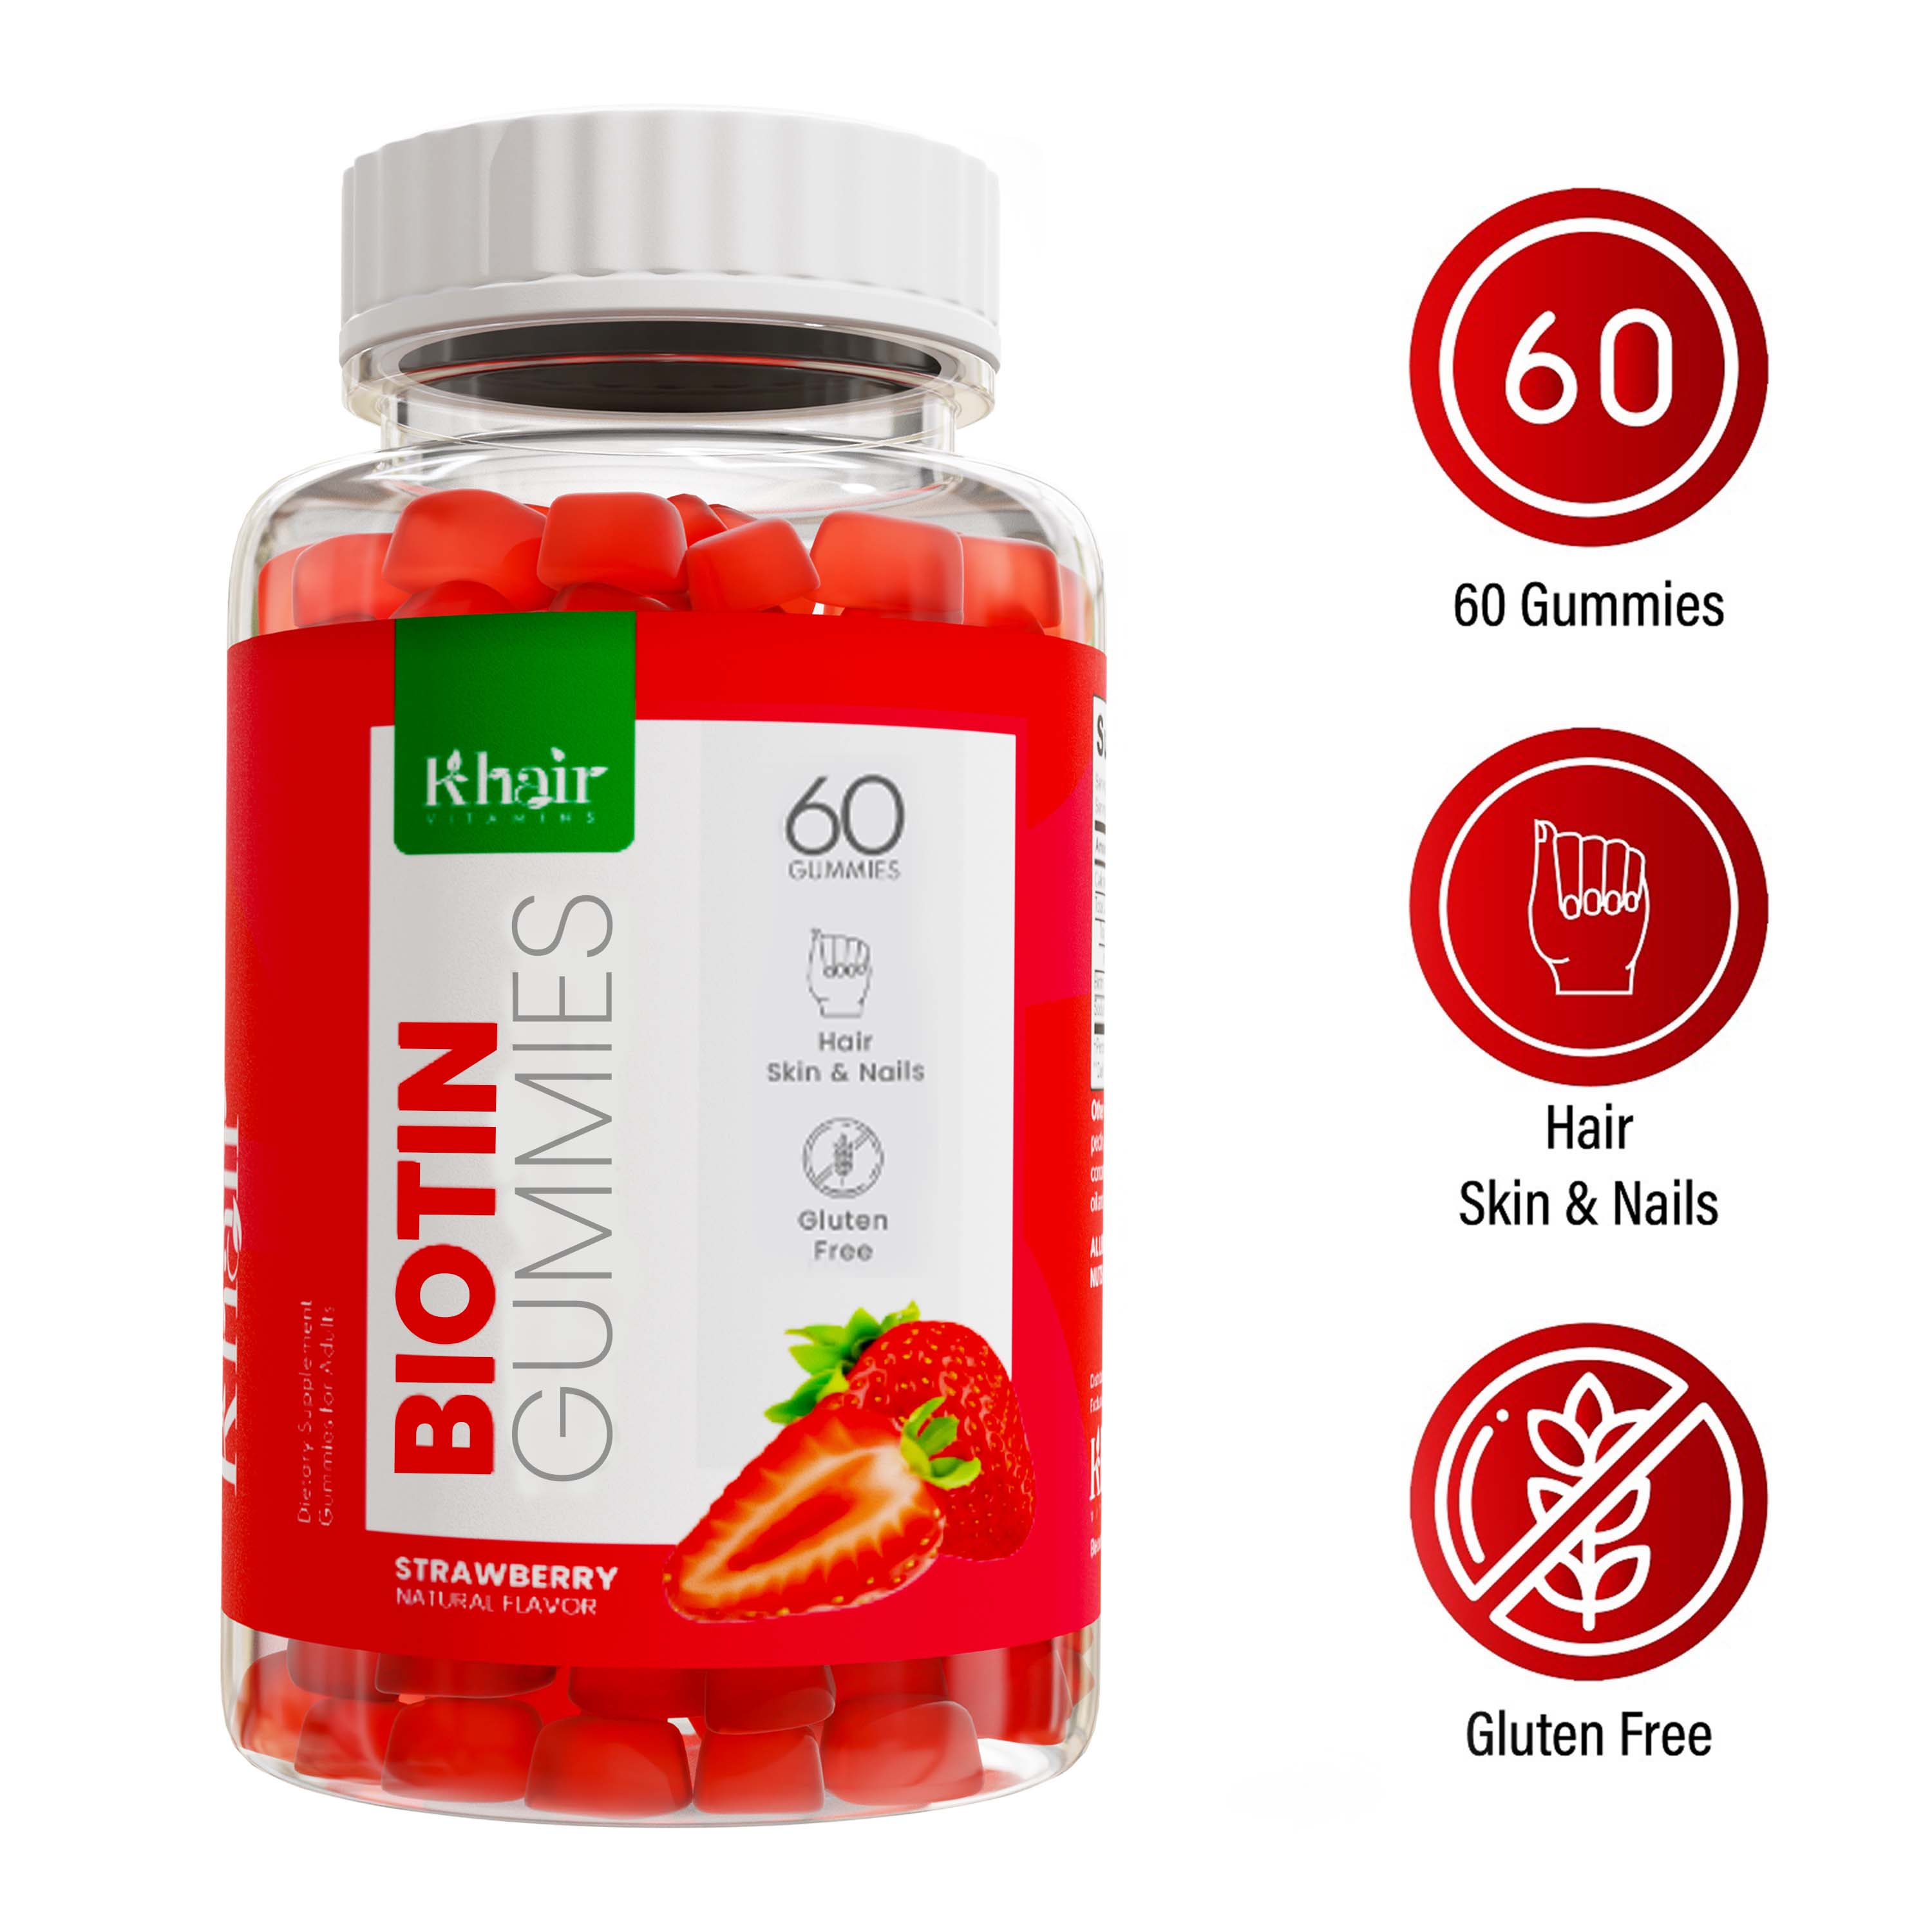 Biotin gummies: a tasty and convenient way to supplement biotin. Supports healthy hair, skin, and nails.